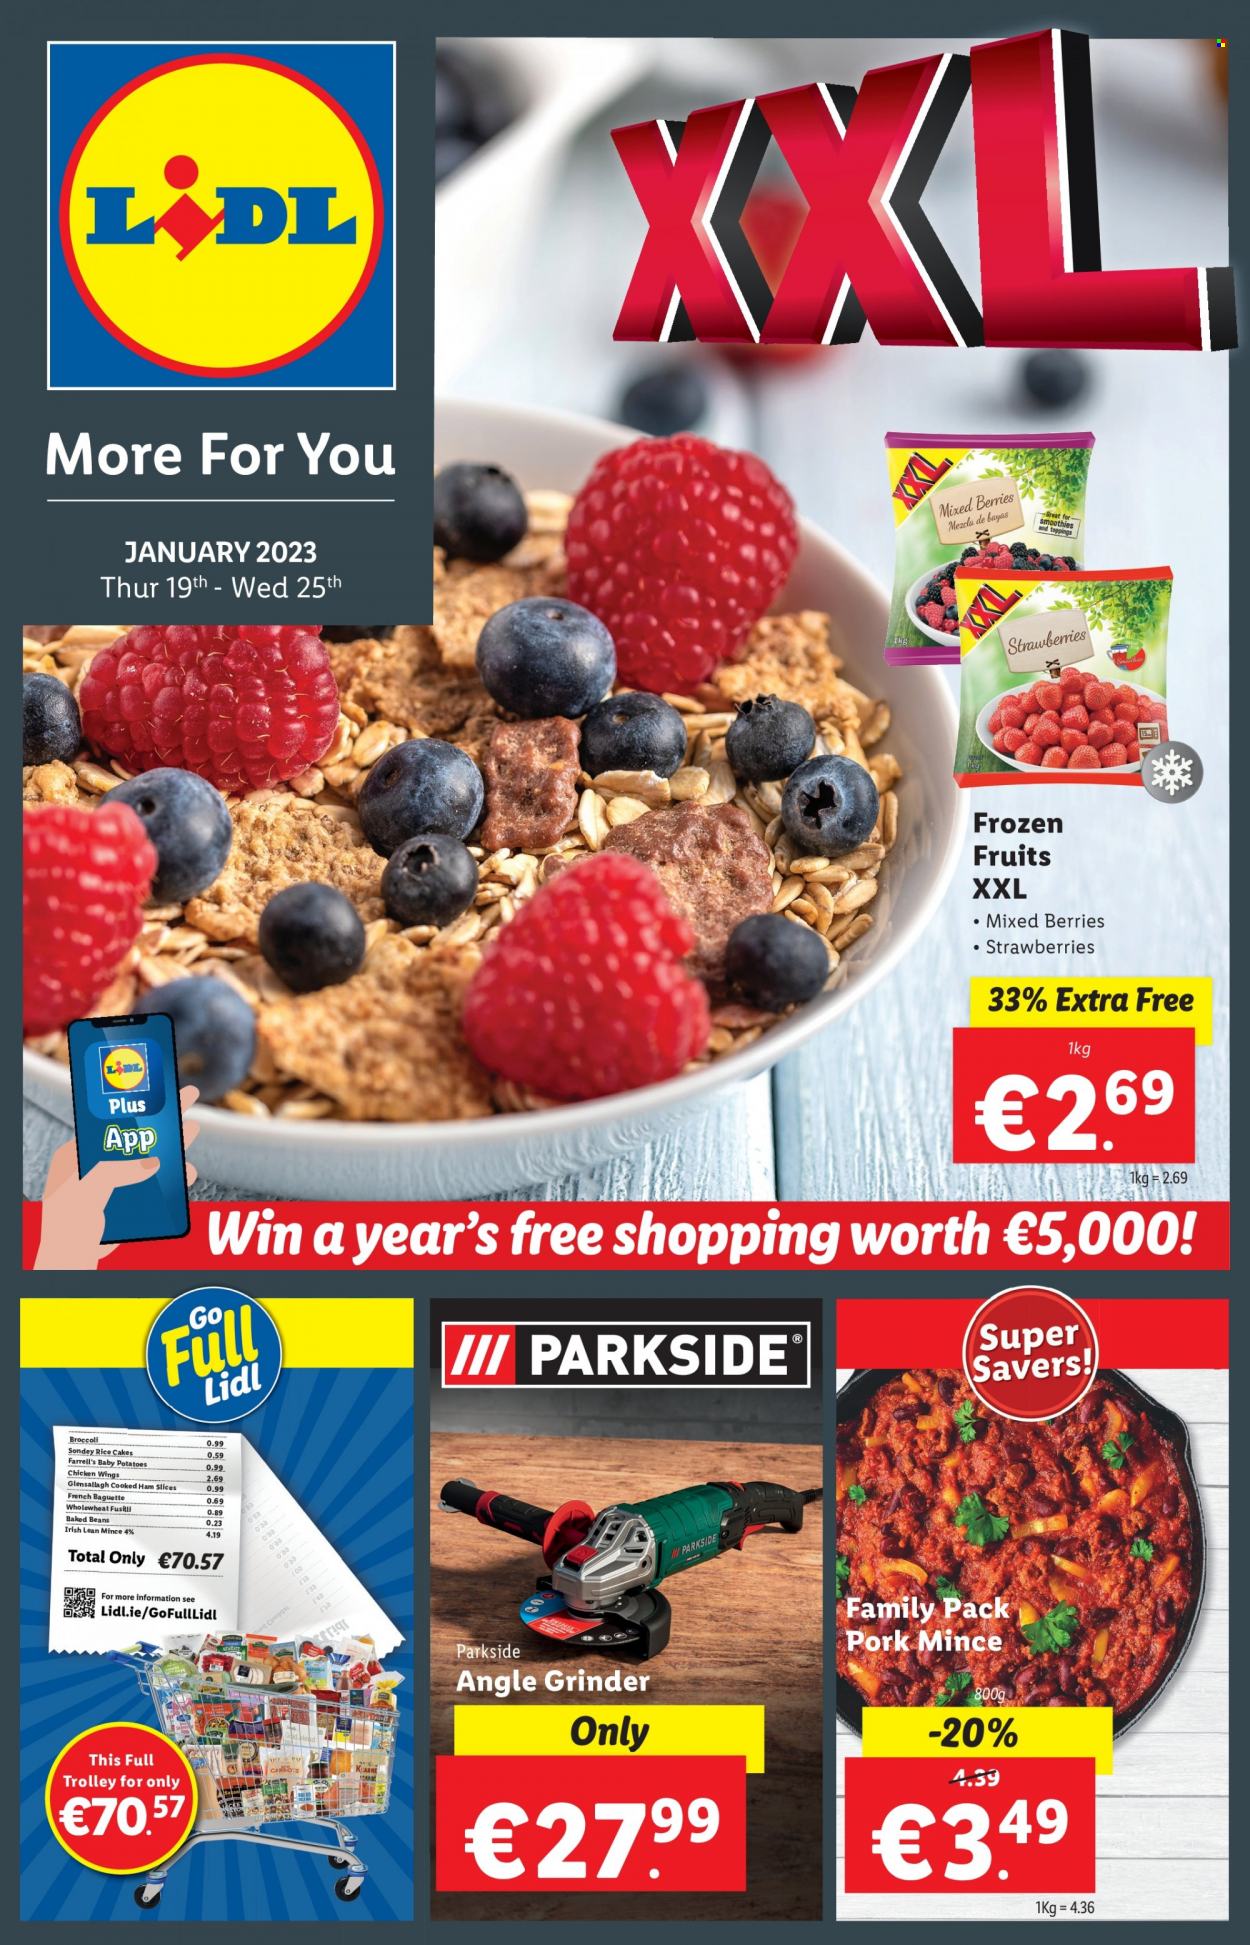 thumbnail - Lidl offer  - 19.01.2023 - 25.01.2023 - Sales products - trolley, baguette, beans, broccoli, potatoes, strawberries, cooked ham, ham, chicken wings, baked beans, ground pork, pork meat, grinder, Parkside, angle grinder. Page 1.